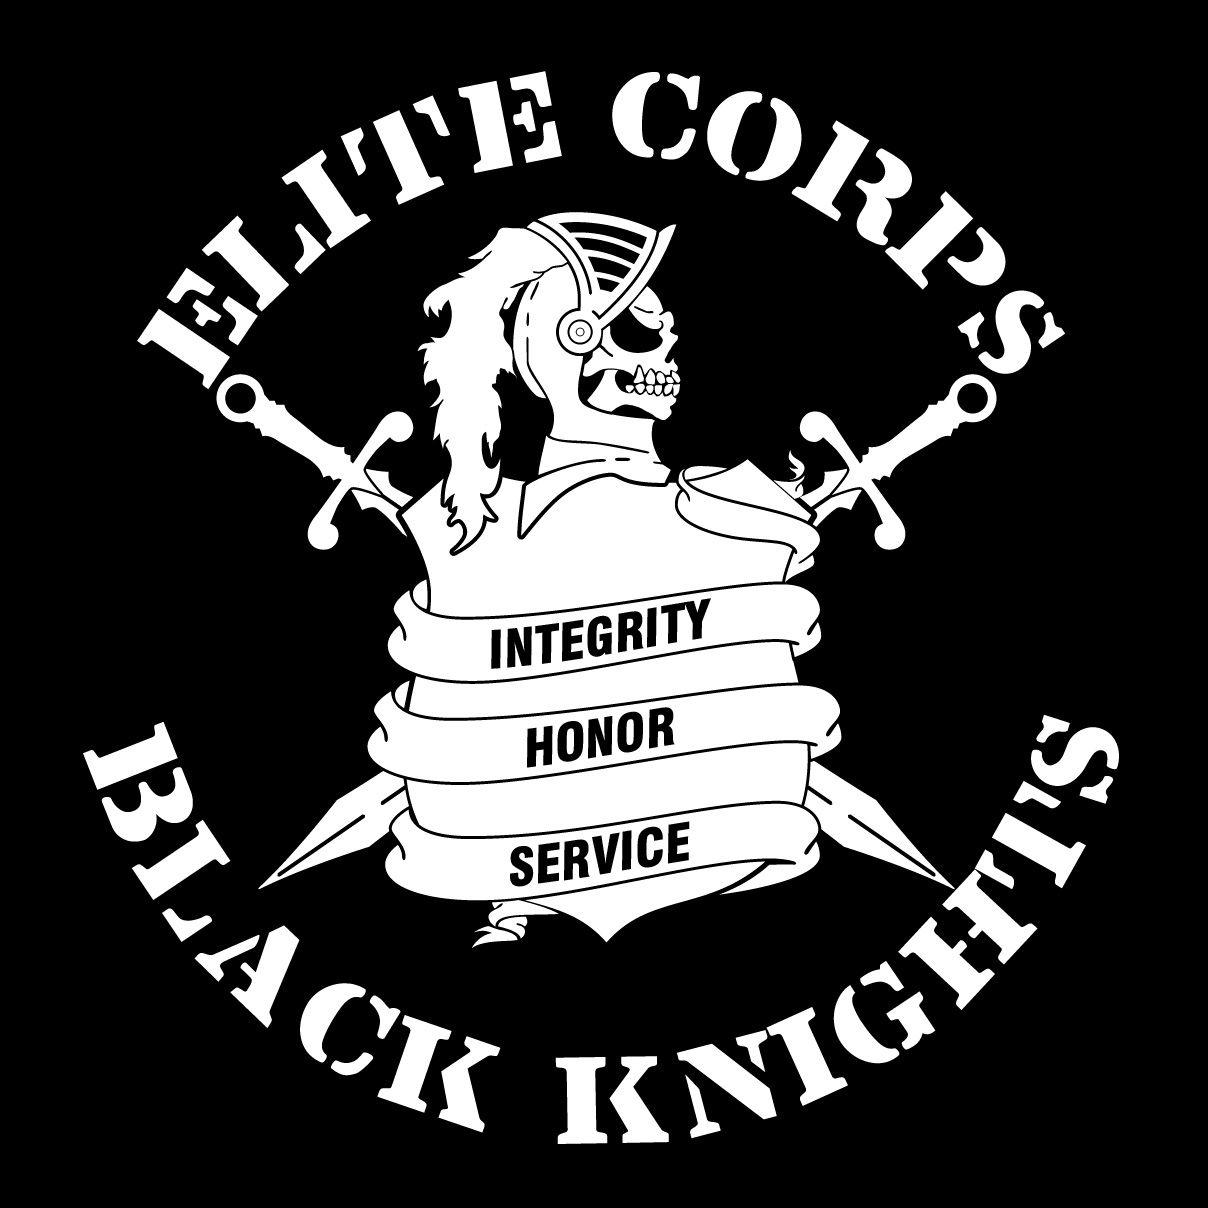 Black Line Eagle Logo - Elite Corps Knights Are you up for it? Bald